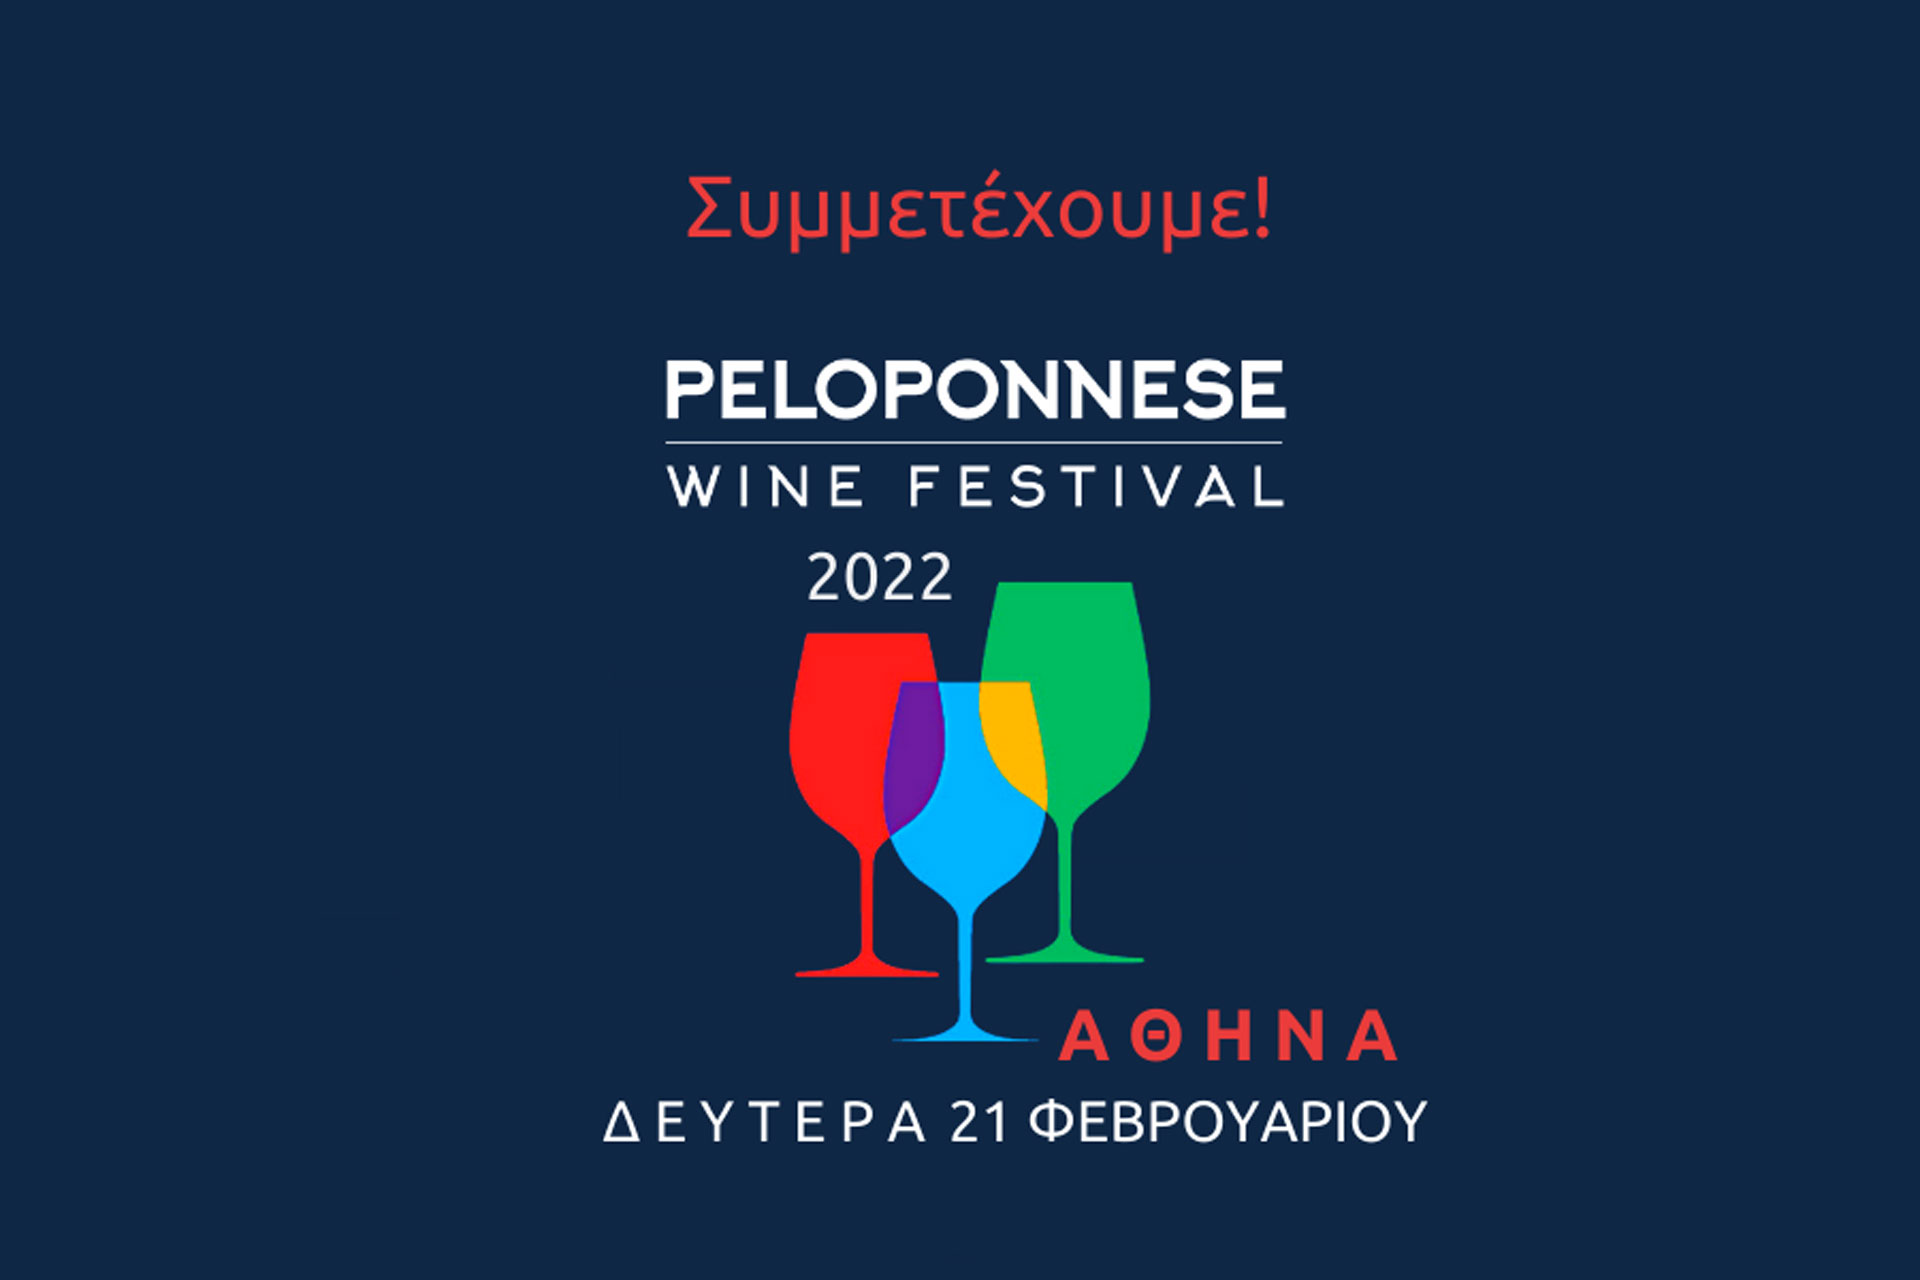 We participate in Peloponnese Wine Festival on 21 February